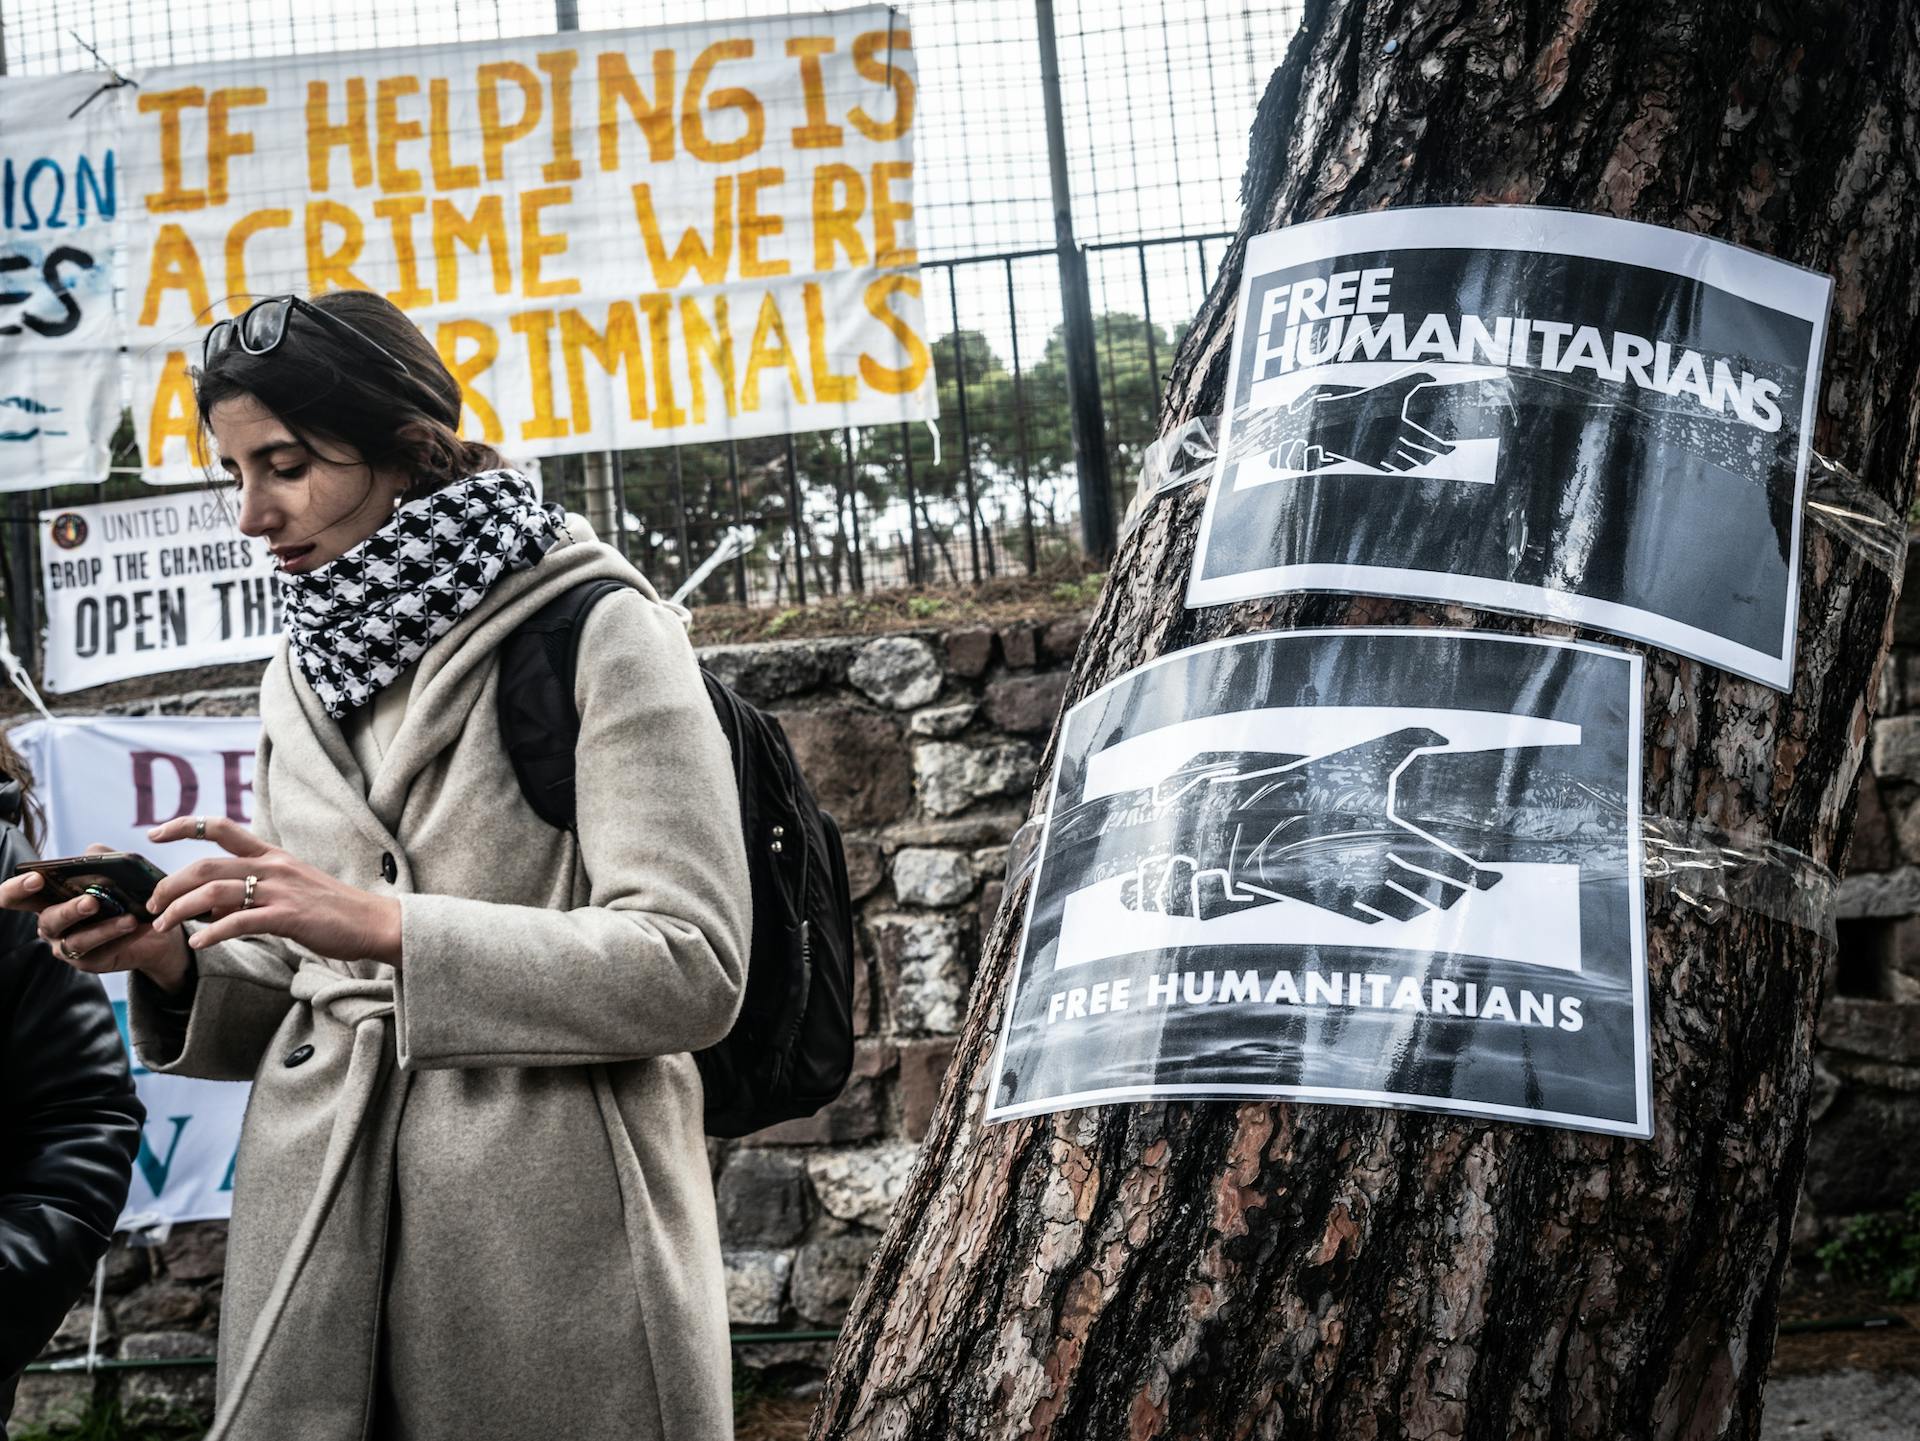 A tree with two 'Free Humanitarians' signs taped to it. Next to it, a person stands in front of a sign that reads 'if helping is a crime we're all criminals.'